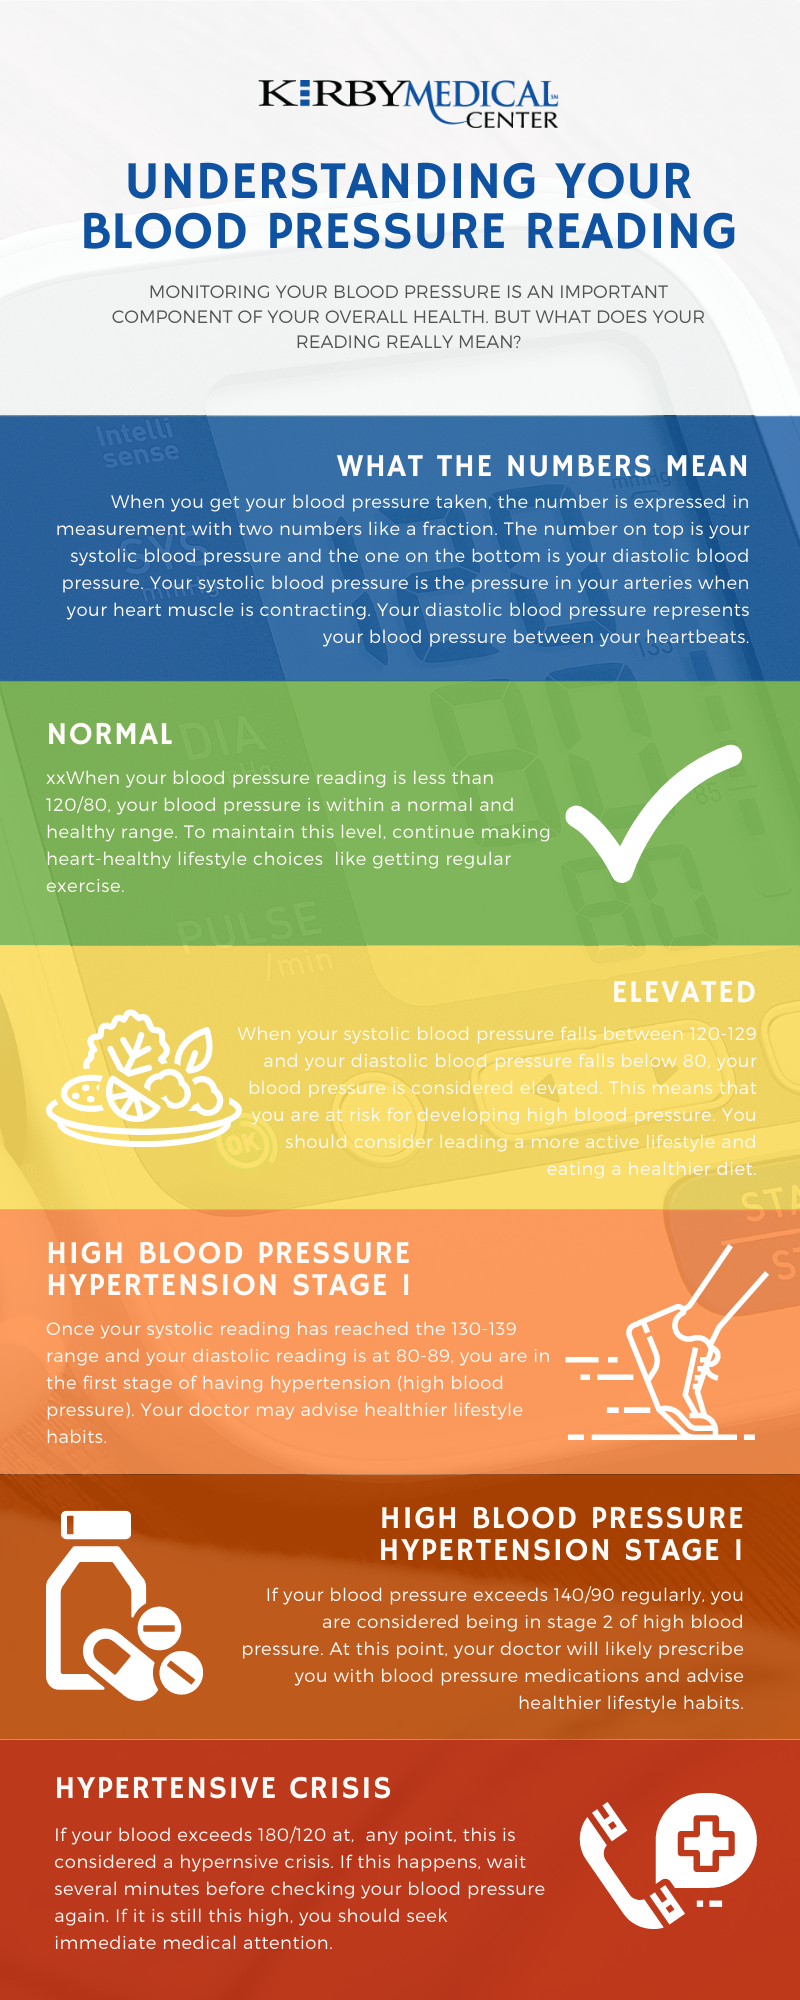 What Reading Should A Normal Blood Pressure Be